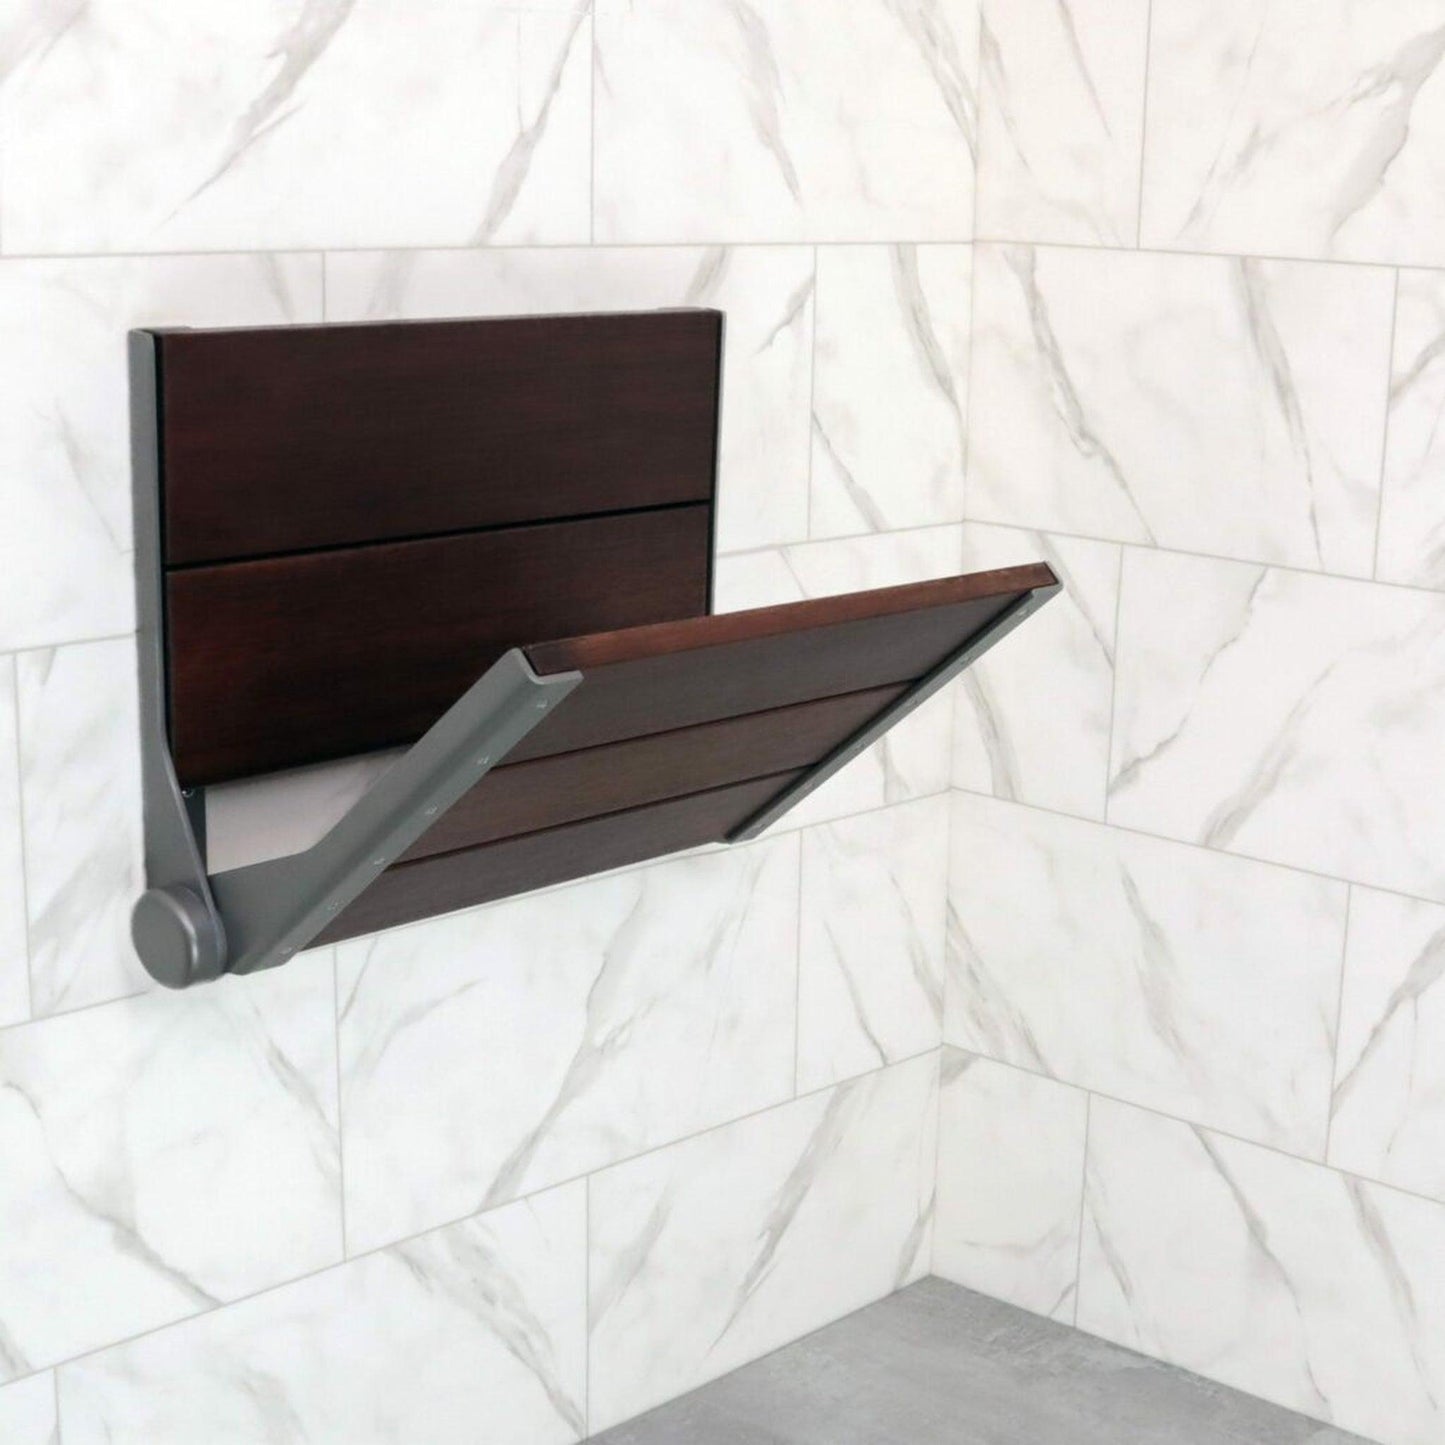 Invisia 26" Rectangle Walnut Stained Bamboo Wall-Mounted SerenaSeat Fold Down Shower Seat With Powder Coated Grey Frame